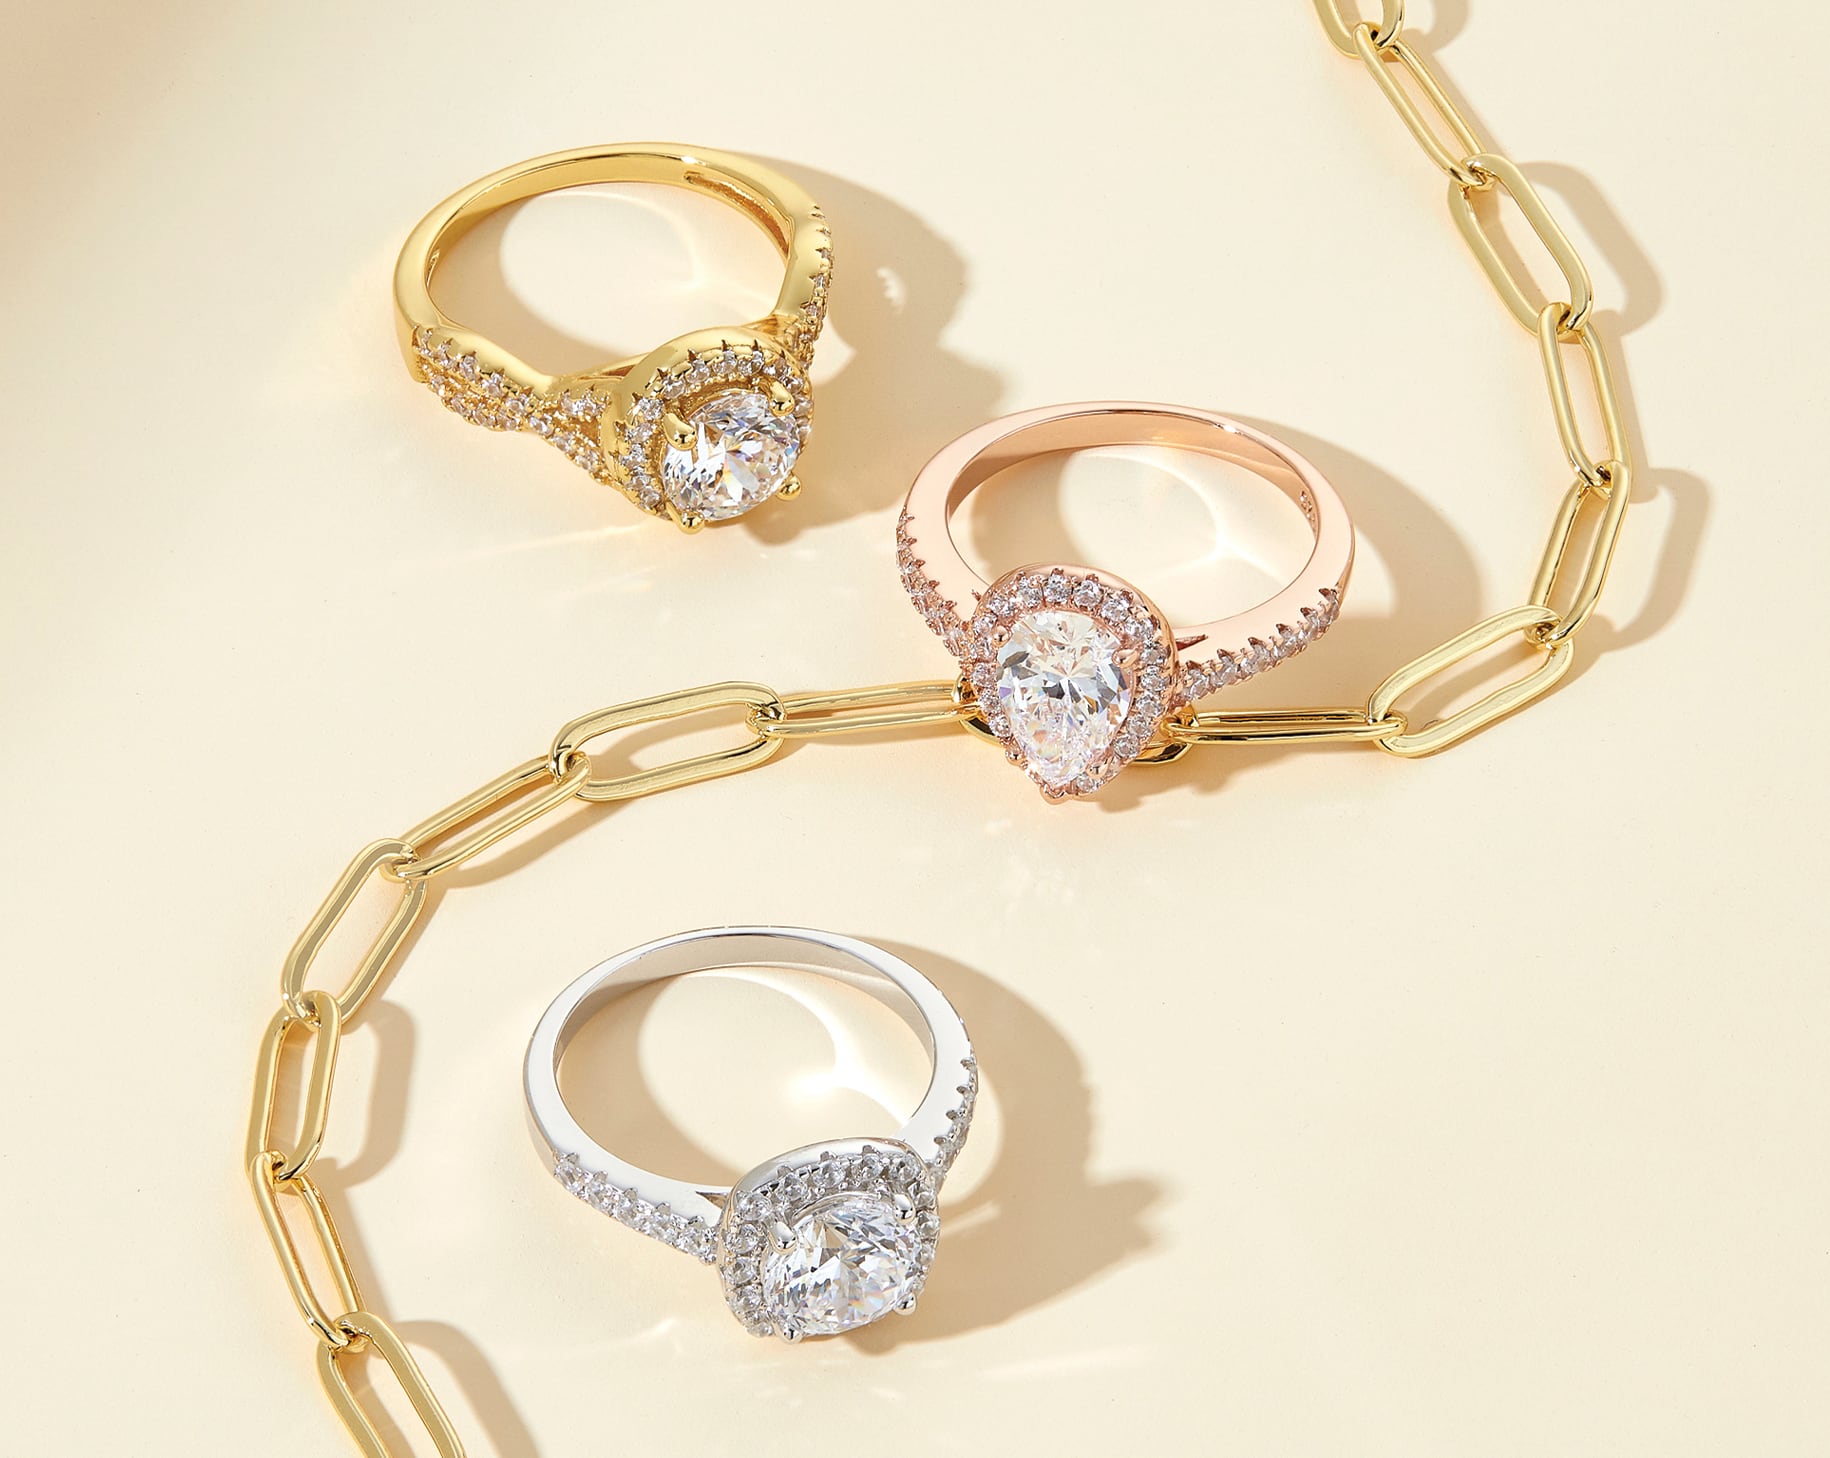 3 halo engagement rings shown in silver, rose gold, and gold